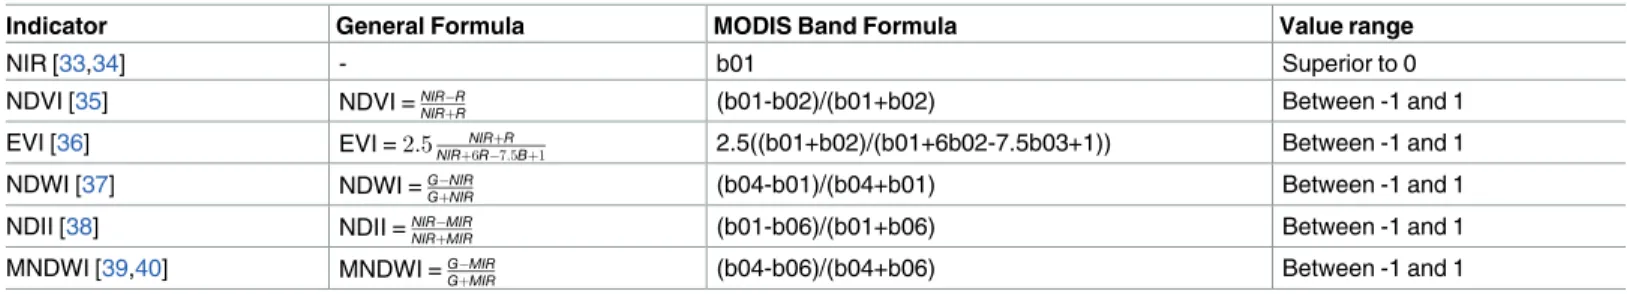 Table 1. Summary of potential flooding indicators, their general formula, matched with MODIS band formula and their values.